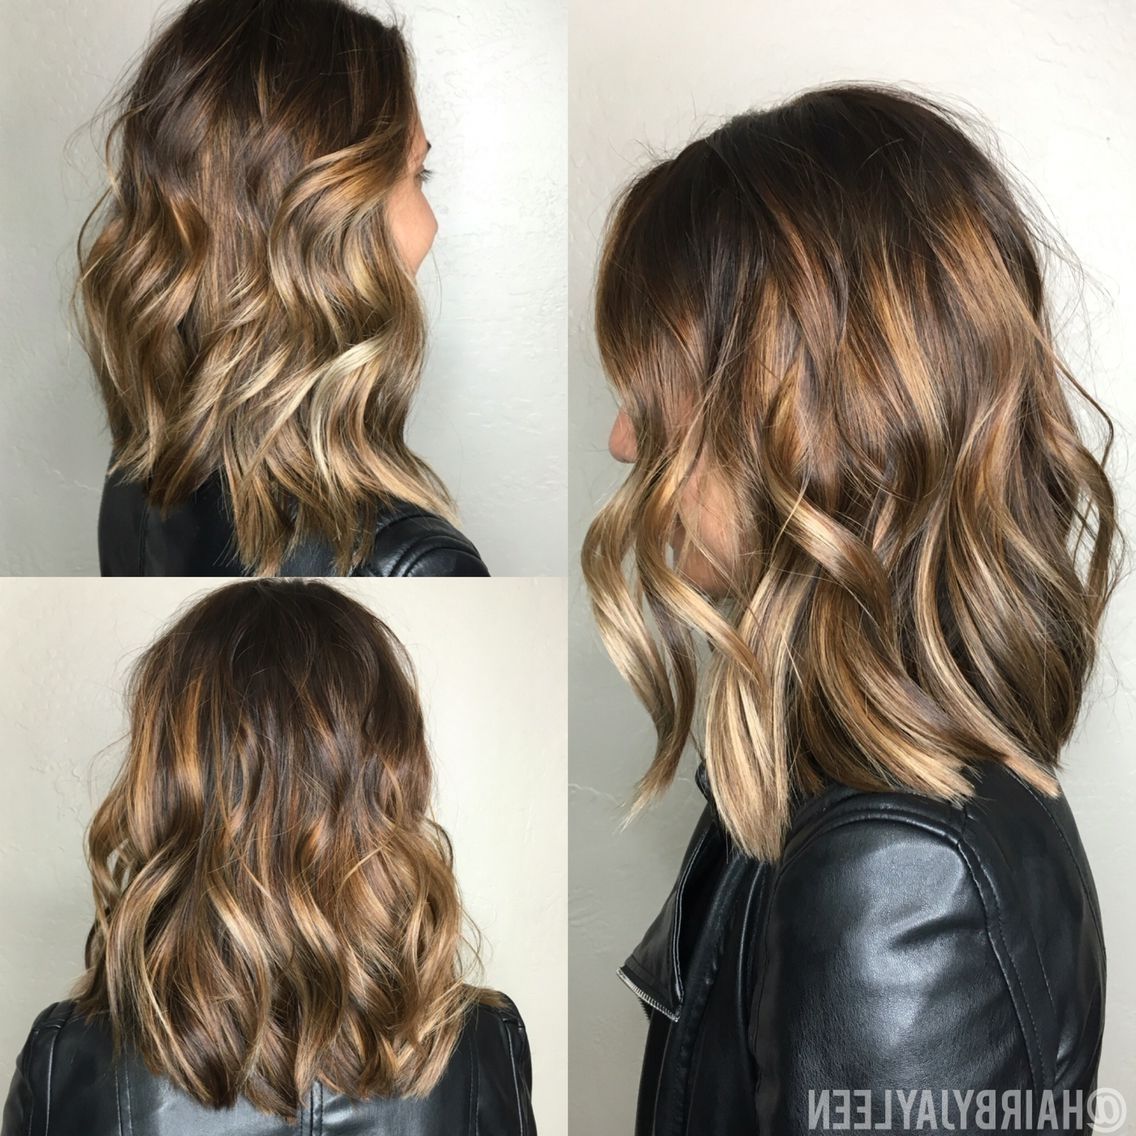 Lob Hairstyle, Short Hair Color, Blonde Balayage, Bronde Hair With Regard To Well Known Bronde Beach Waves Blonde Hairstyles (View 19 of 20)